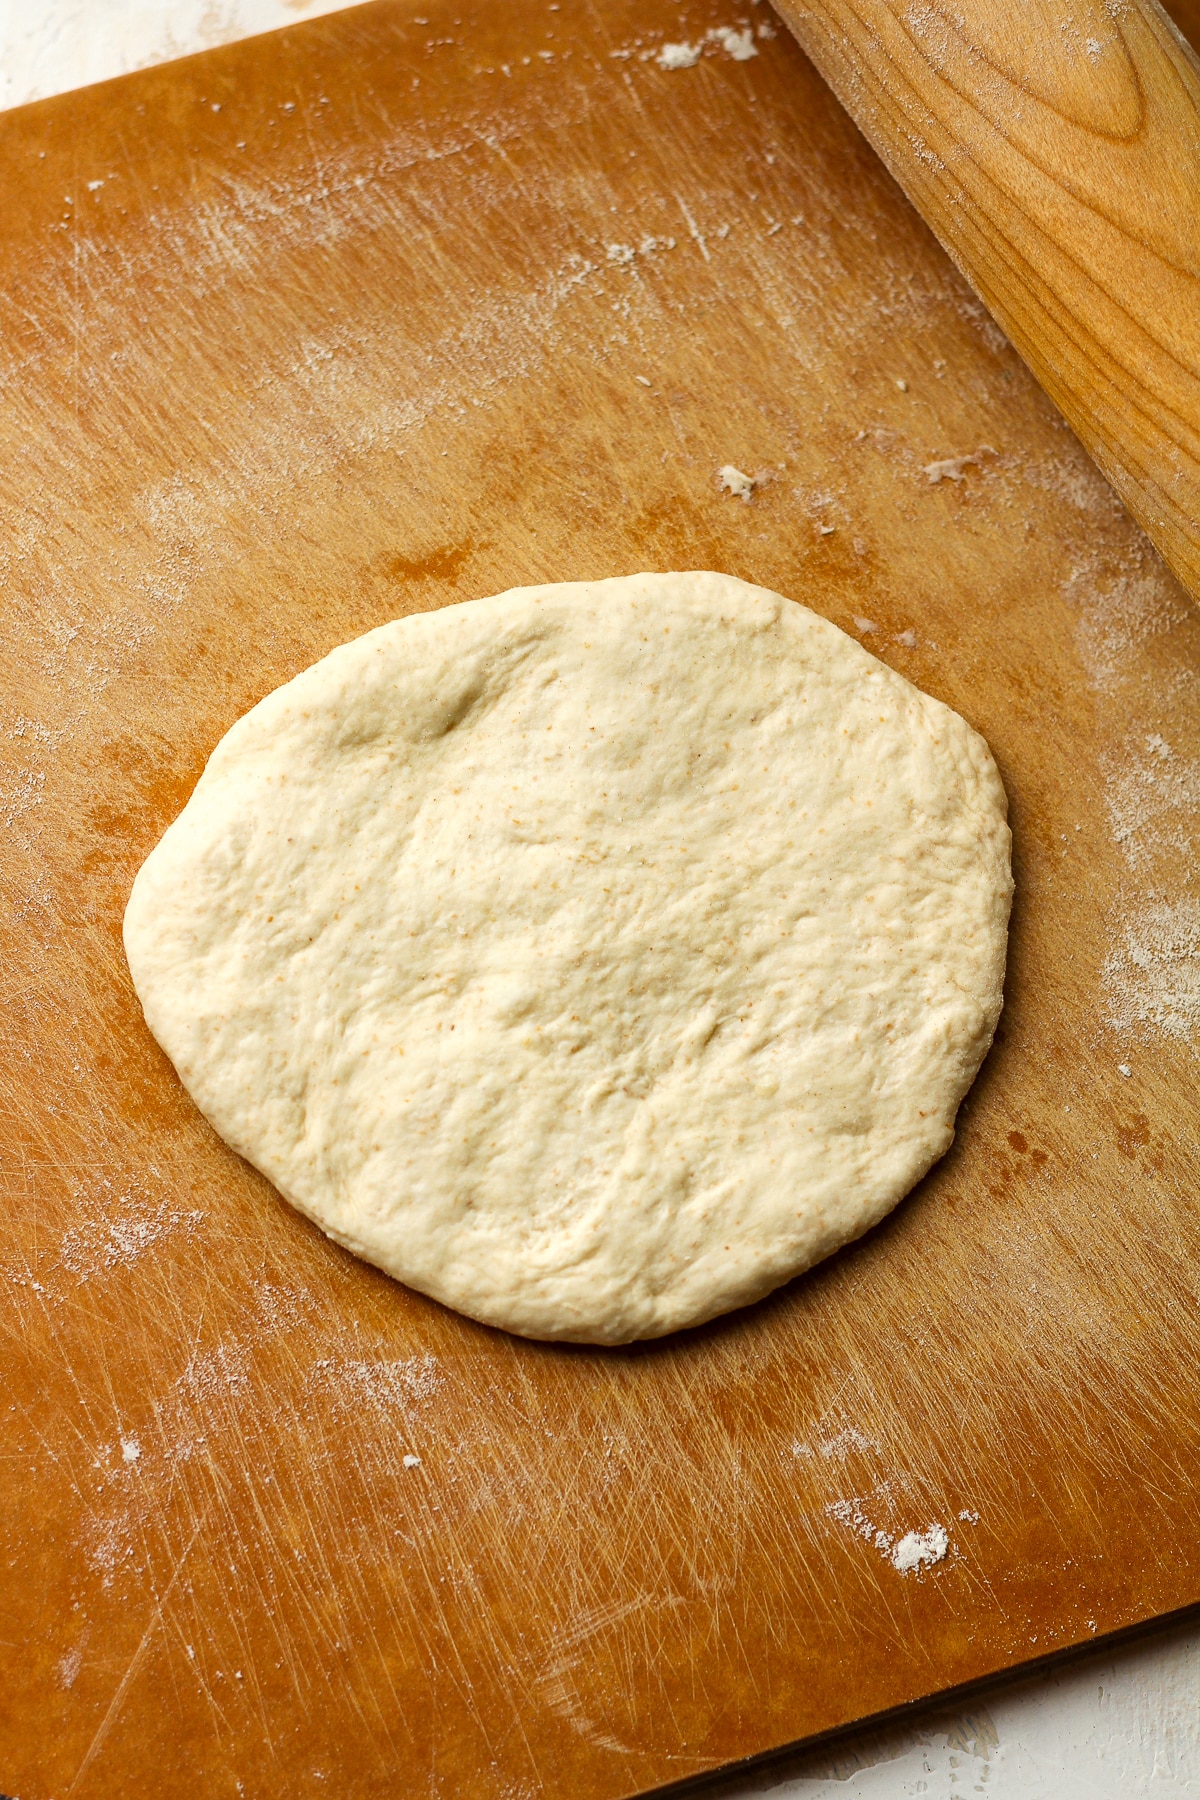 A rolled out sourdough round.